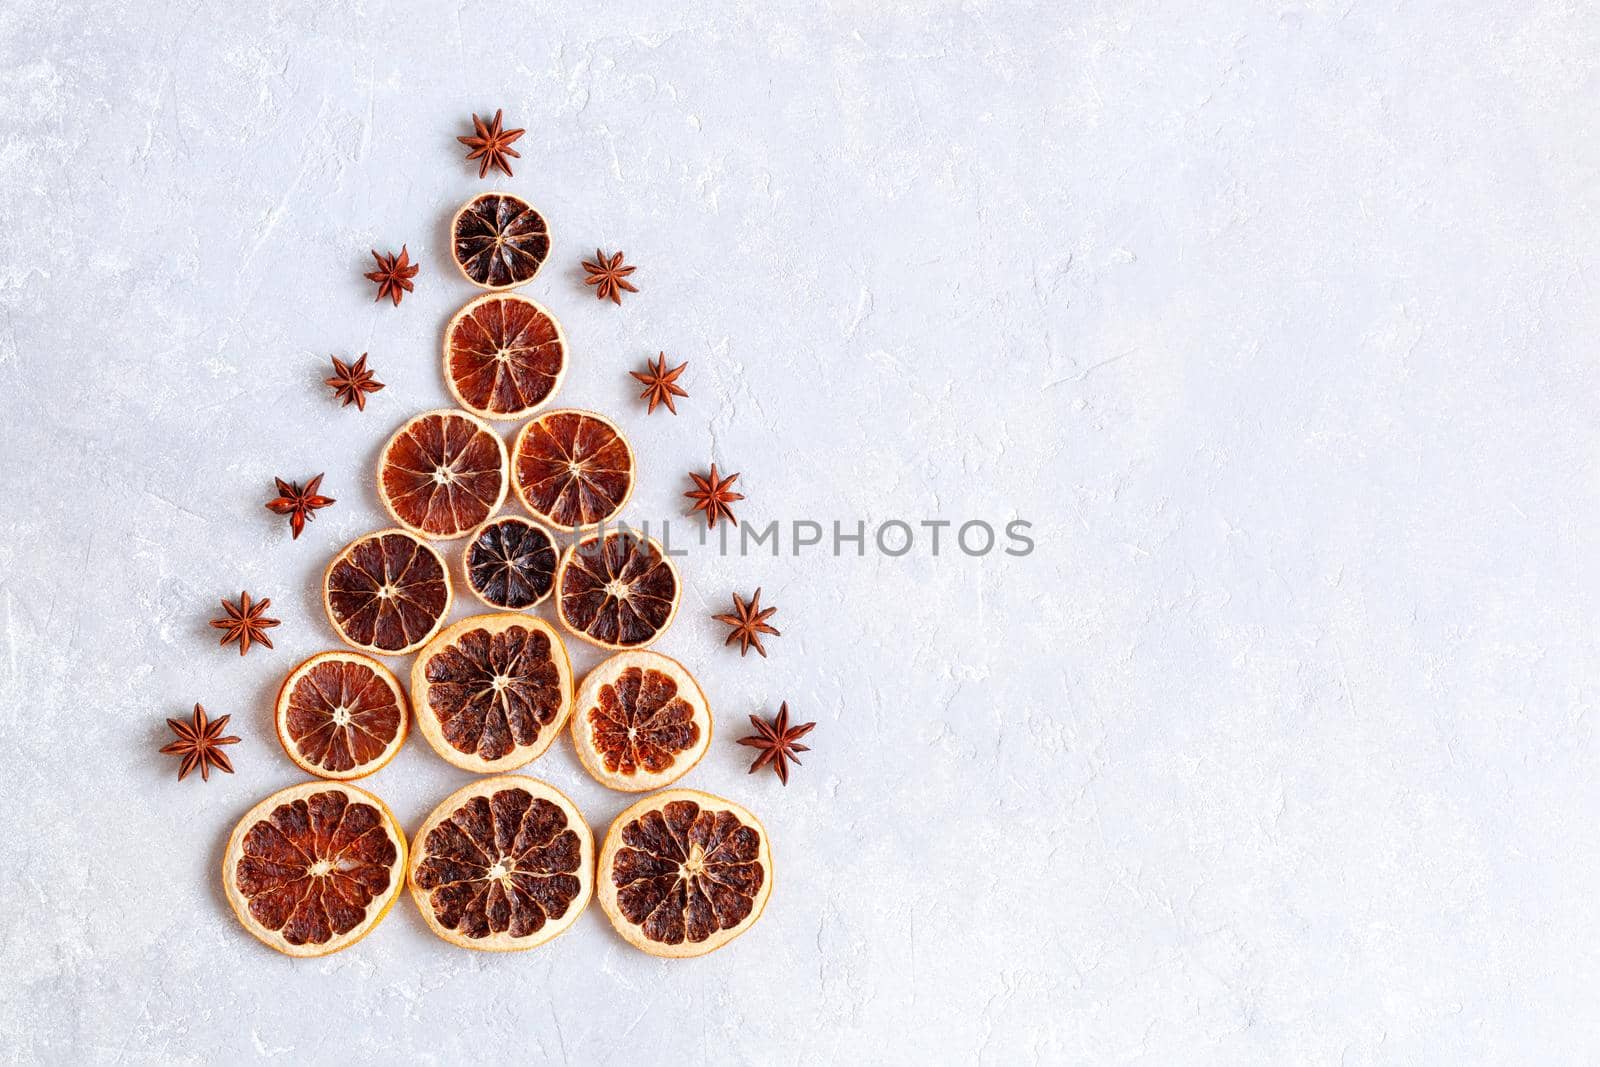 Christmas tree made of dry orange slices and decorated with anise stars, zero waste idea, top view, copyspace